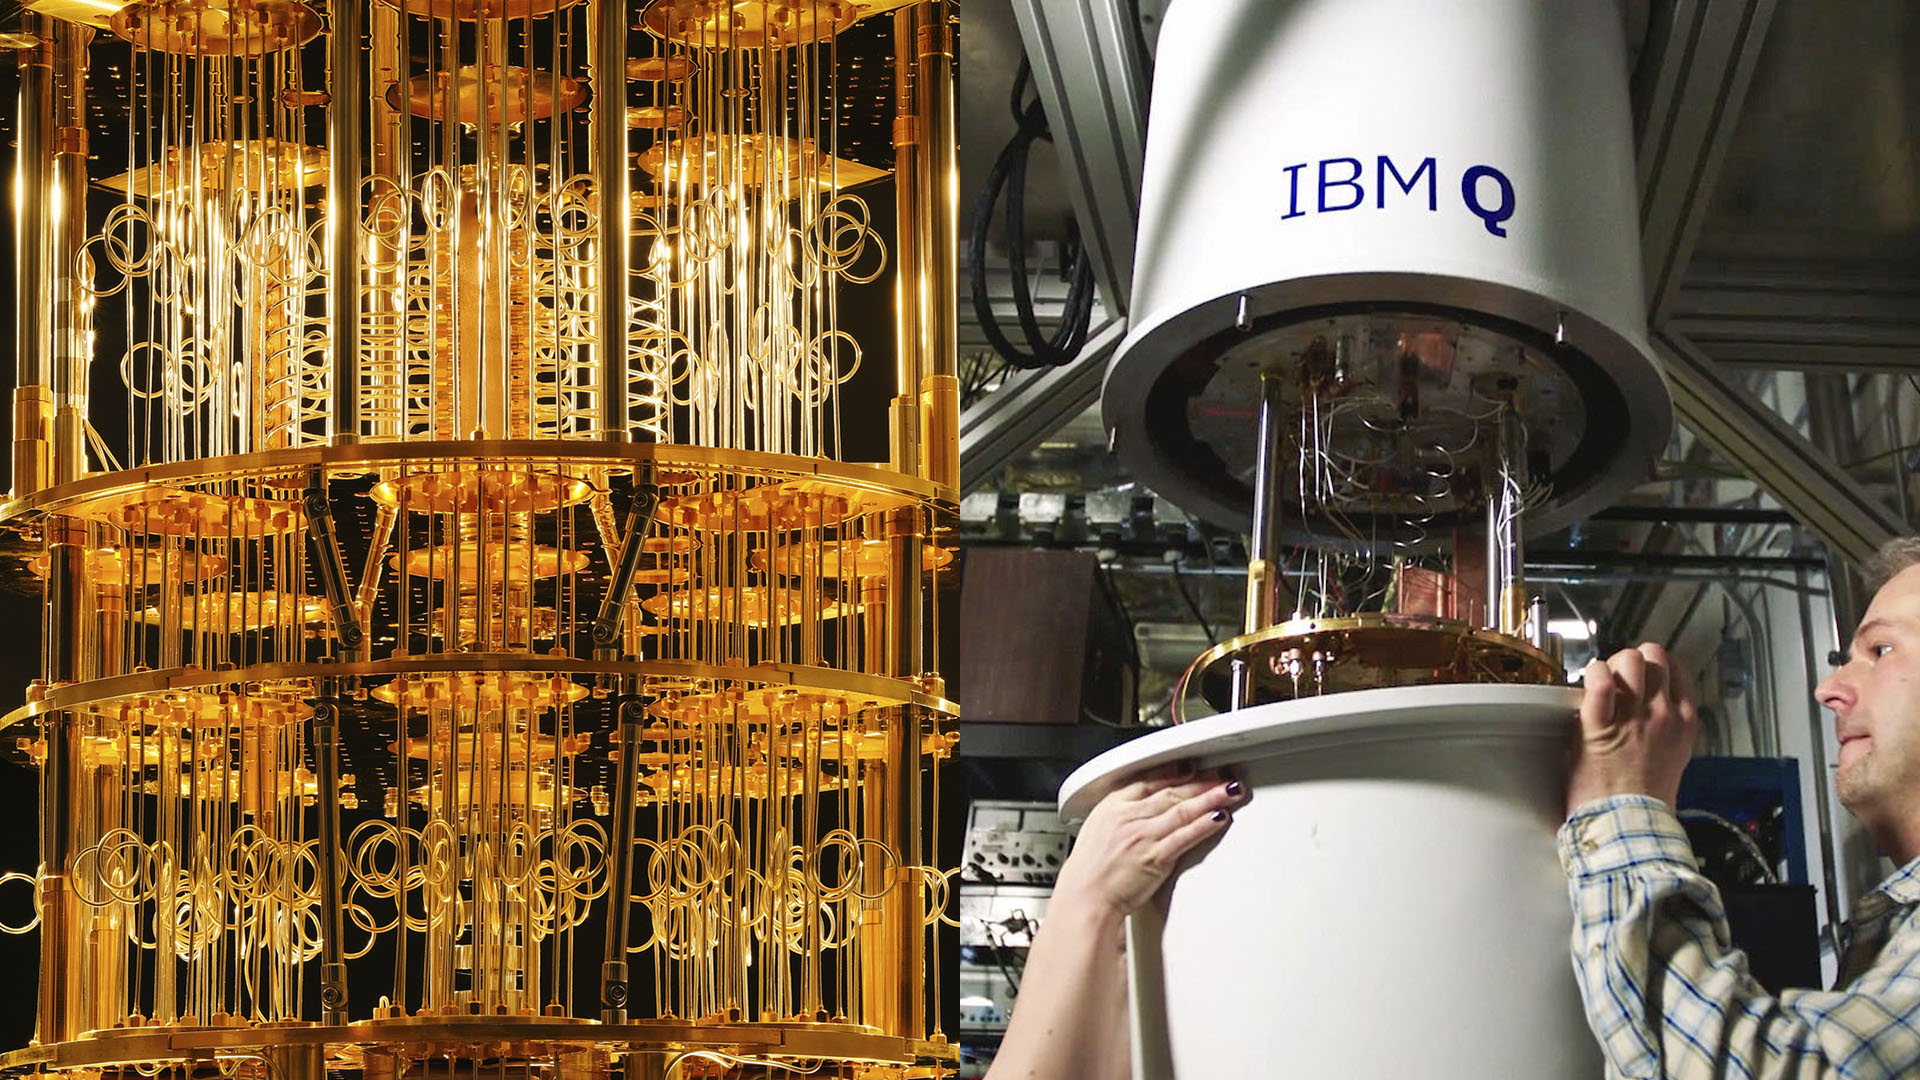 IBM quantum computing updates: System Two and Heron - The Verge